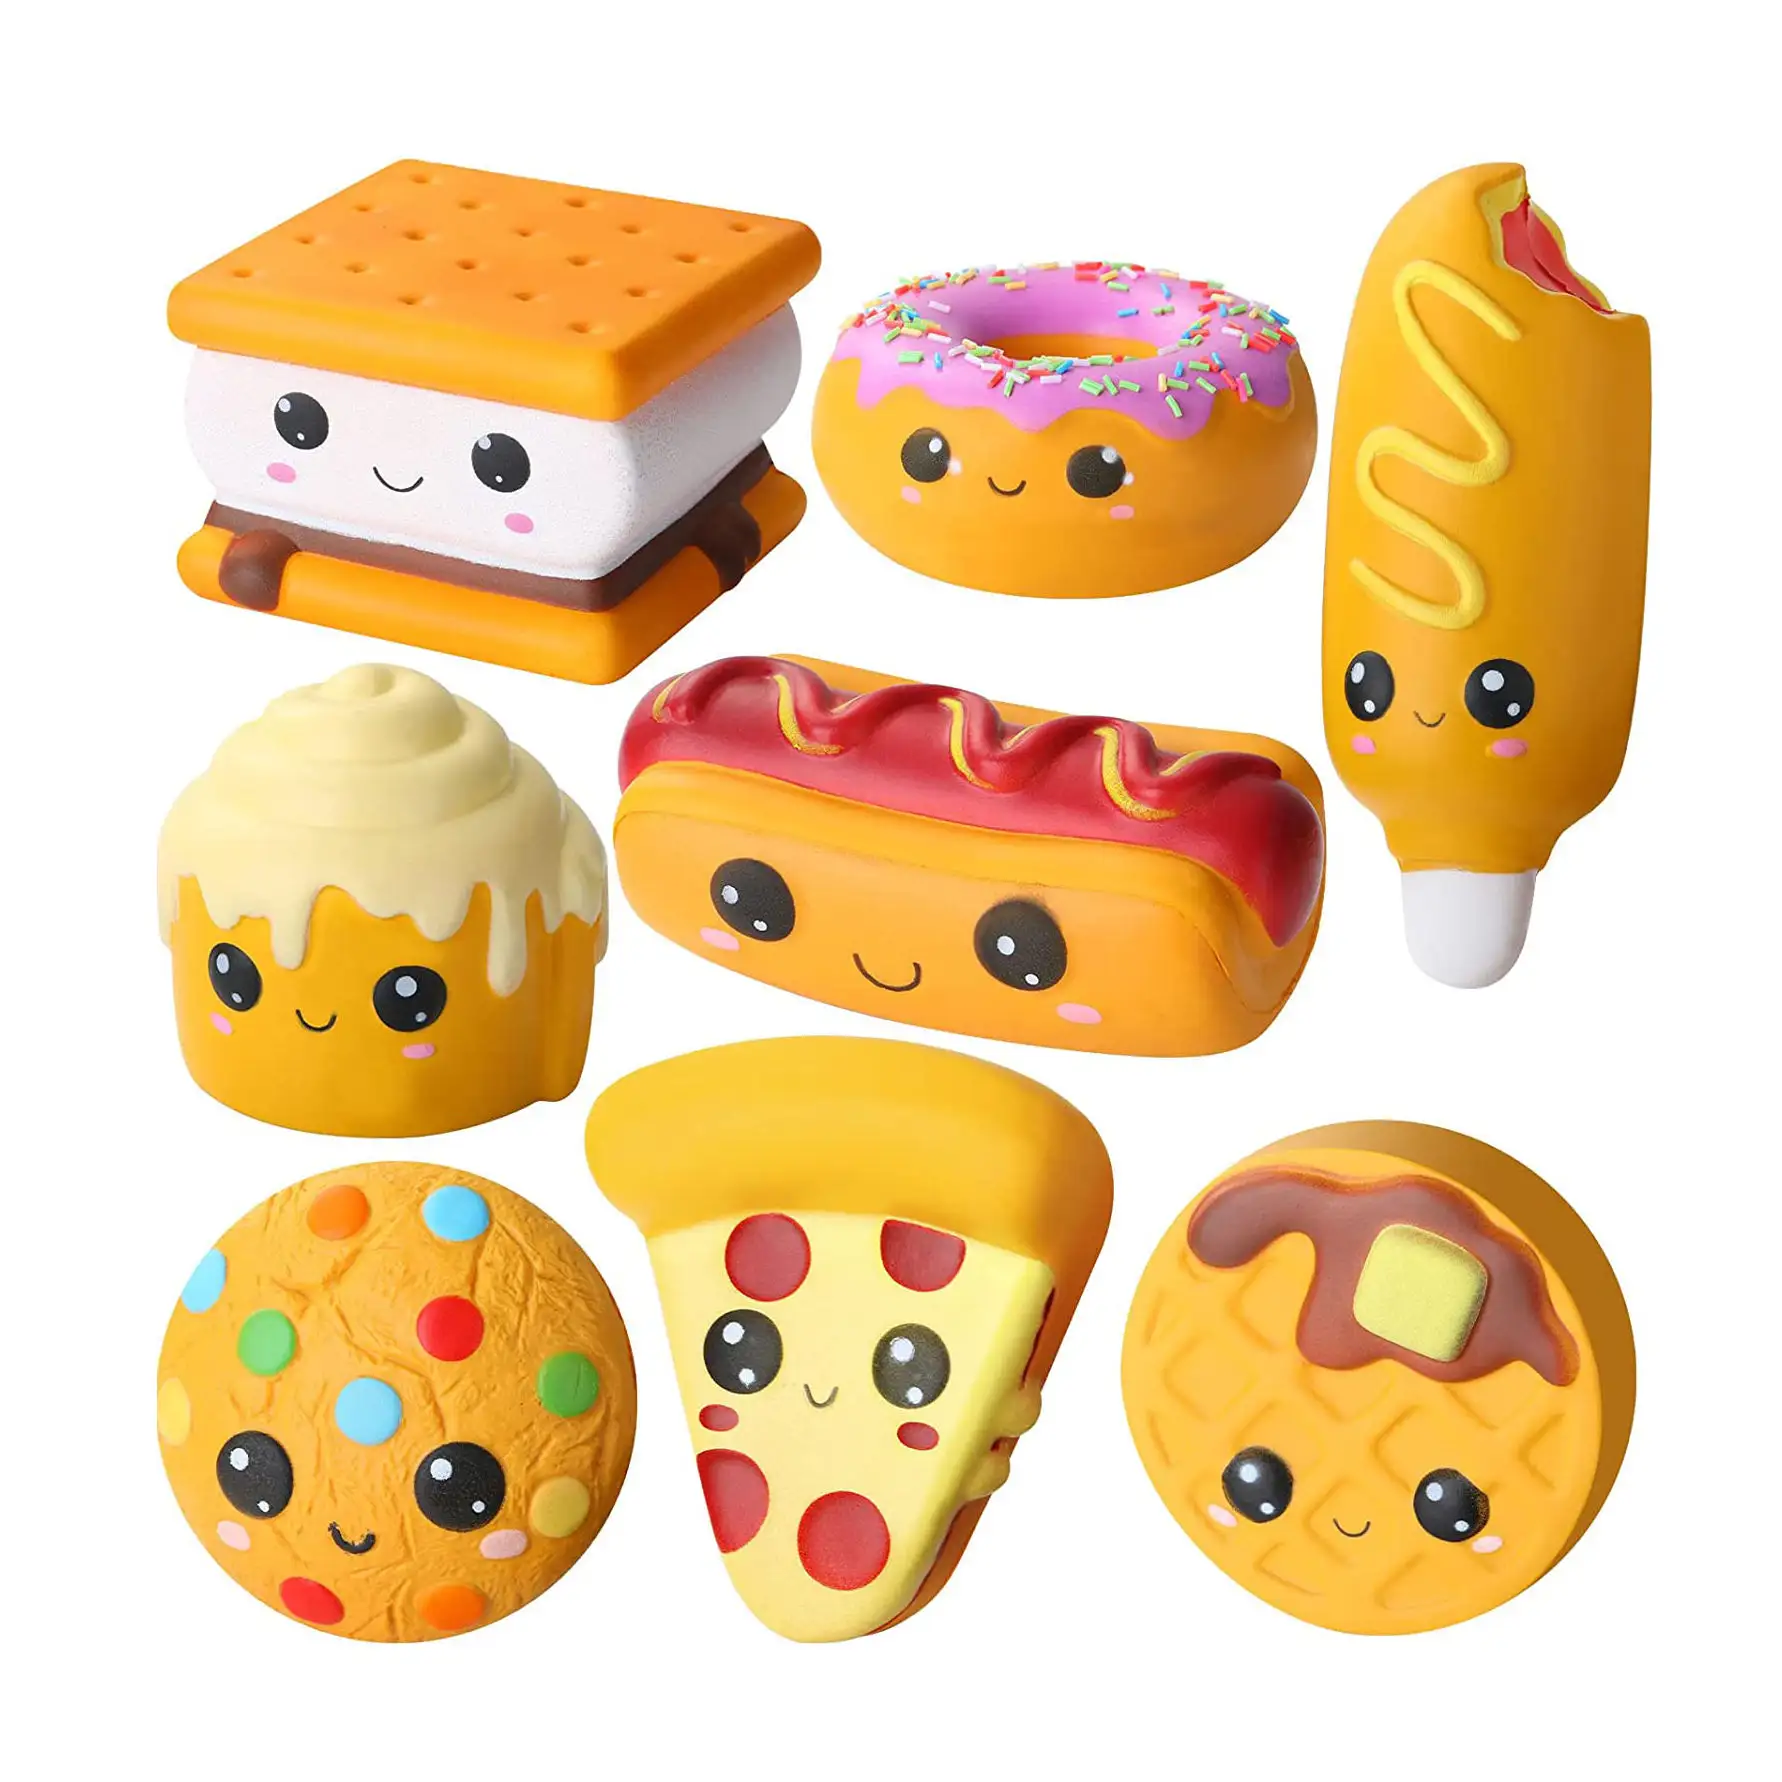 Cheapest Price Kids Toys Online Manufacturer Girls Kawaii PU Foam Slow Rising Food Squishy Toys for Kids Children